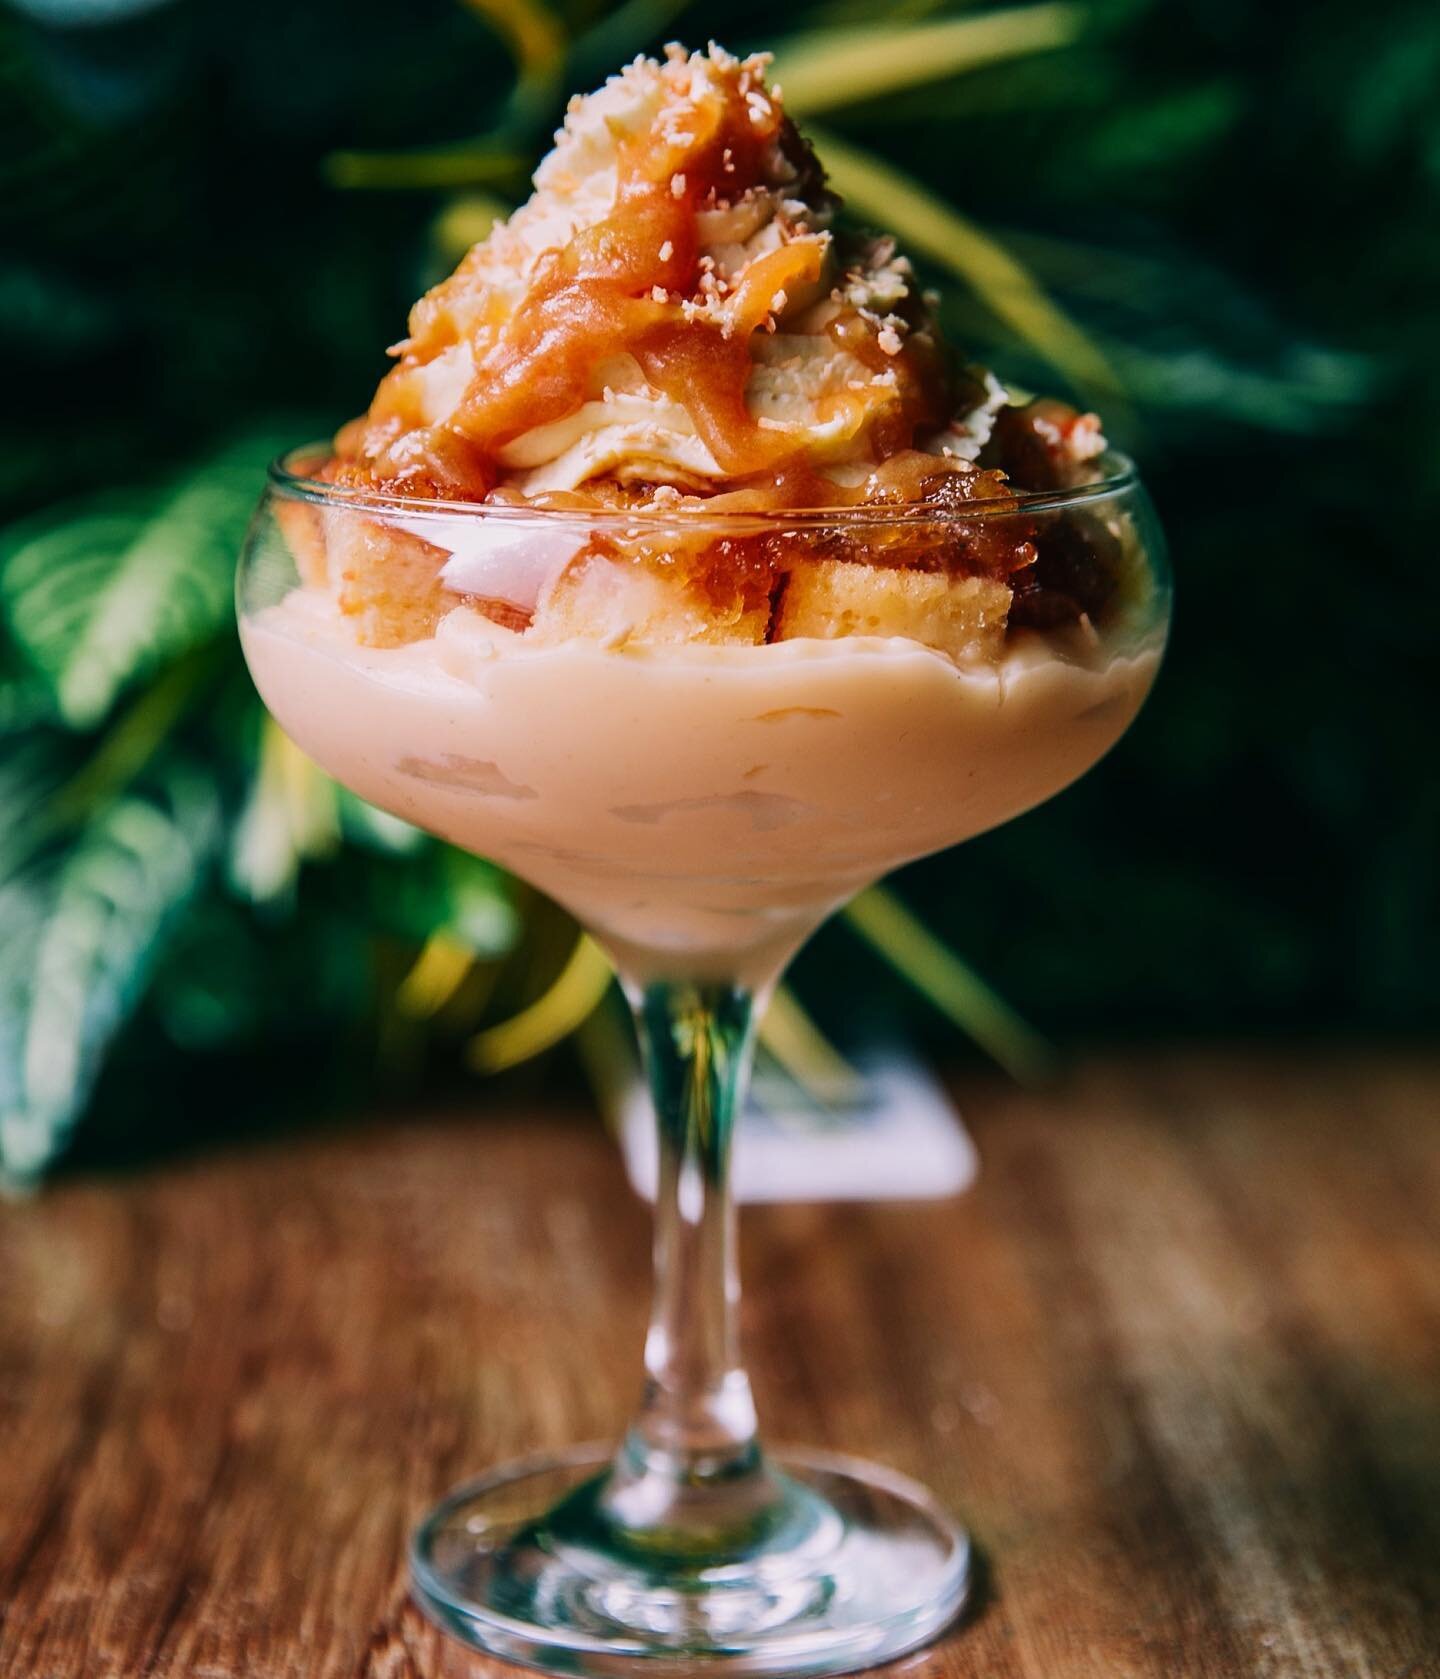 We introduce to you our newest special - Pinapple Genoise Trifle! 🍍

Let your inner sweet tooth run wild with layers of succulent grilled pineapple, light sponge cake, and indulgent whipped cream. Topped off with a drizzle of either caramel or rum s